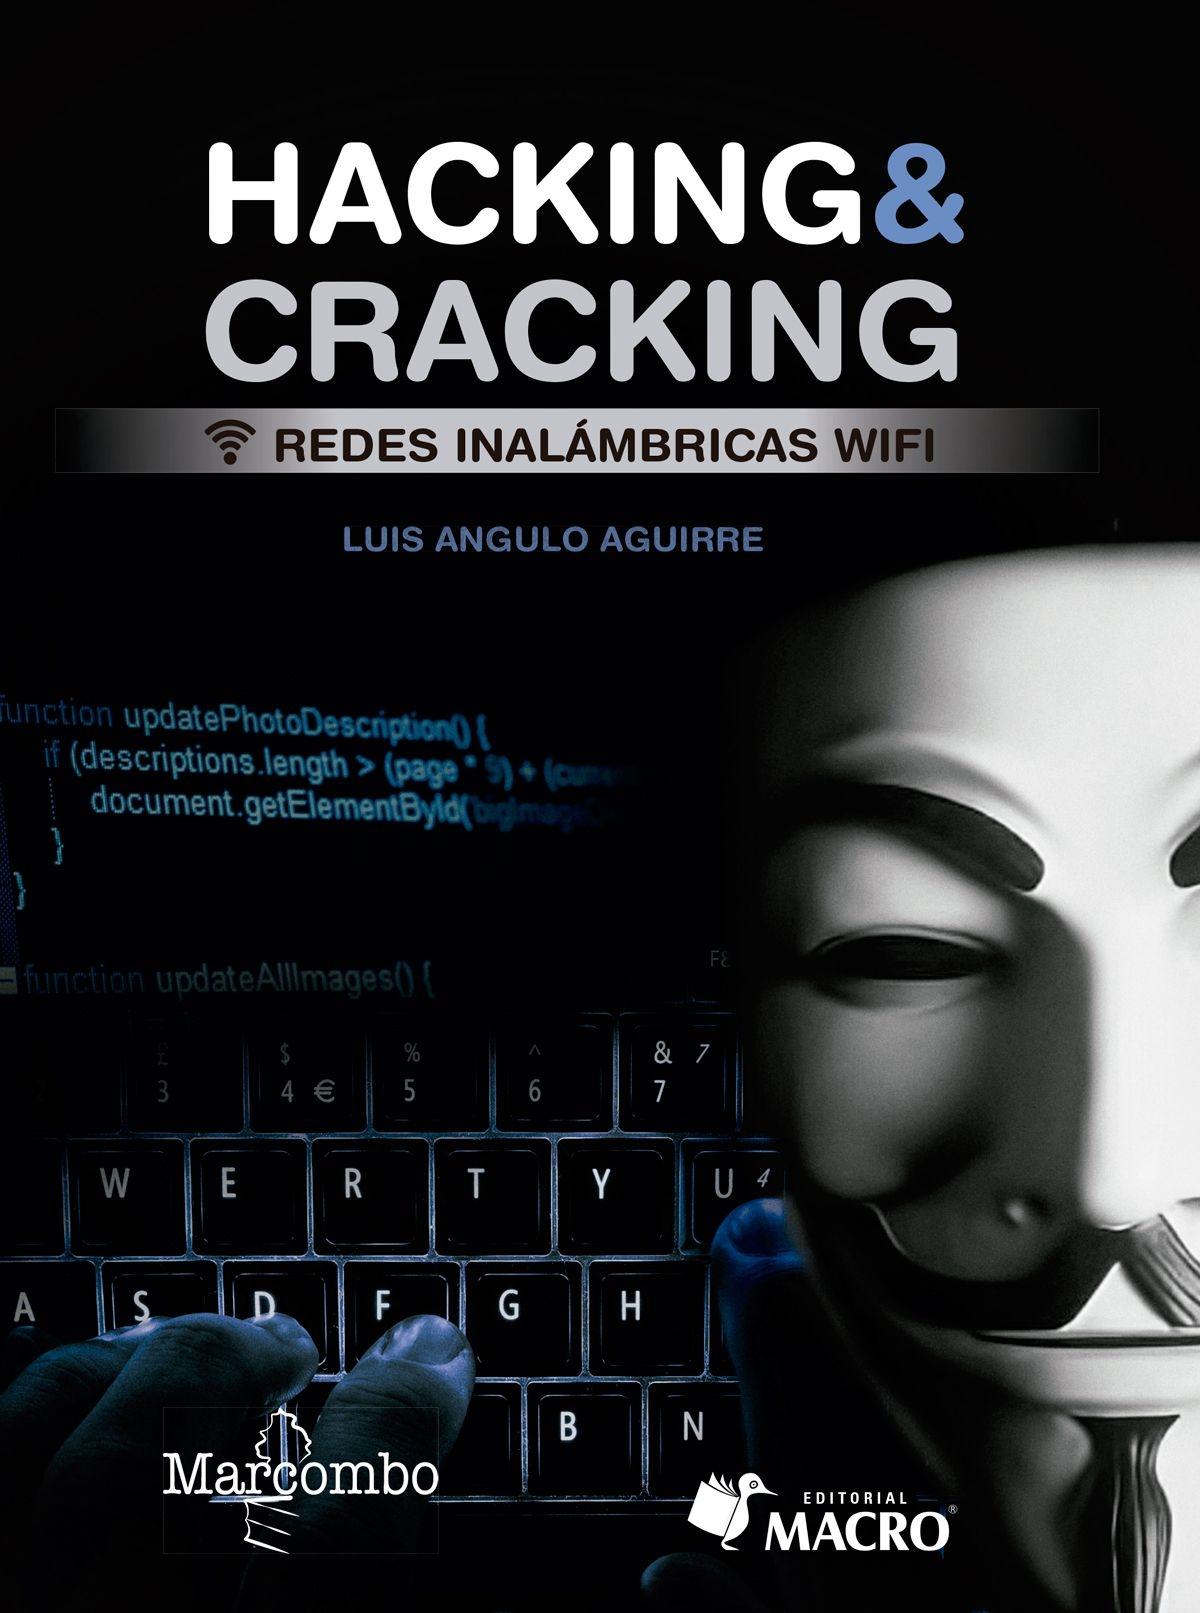 Hacking & cracking "Redes inalámbricas wifi "